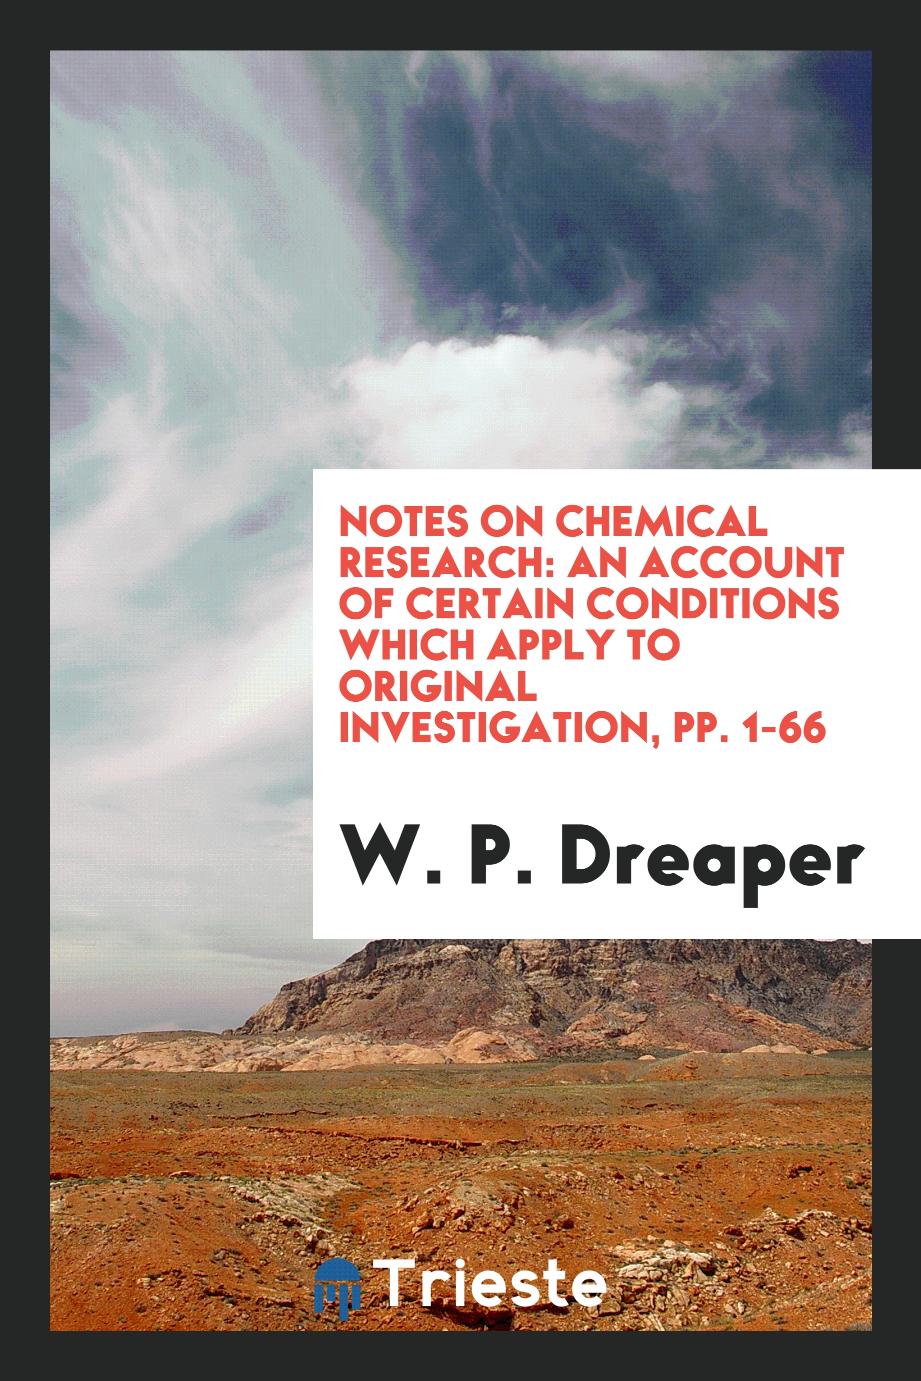 Notes on Chemical Research: An Account of Certain Conditions which Apply to original investigation, pp. 1-66